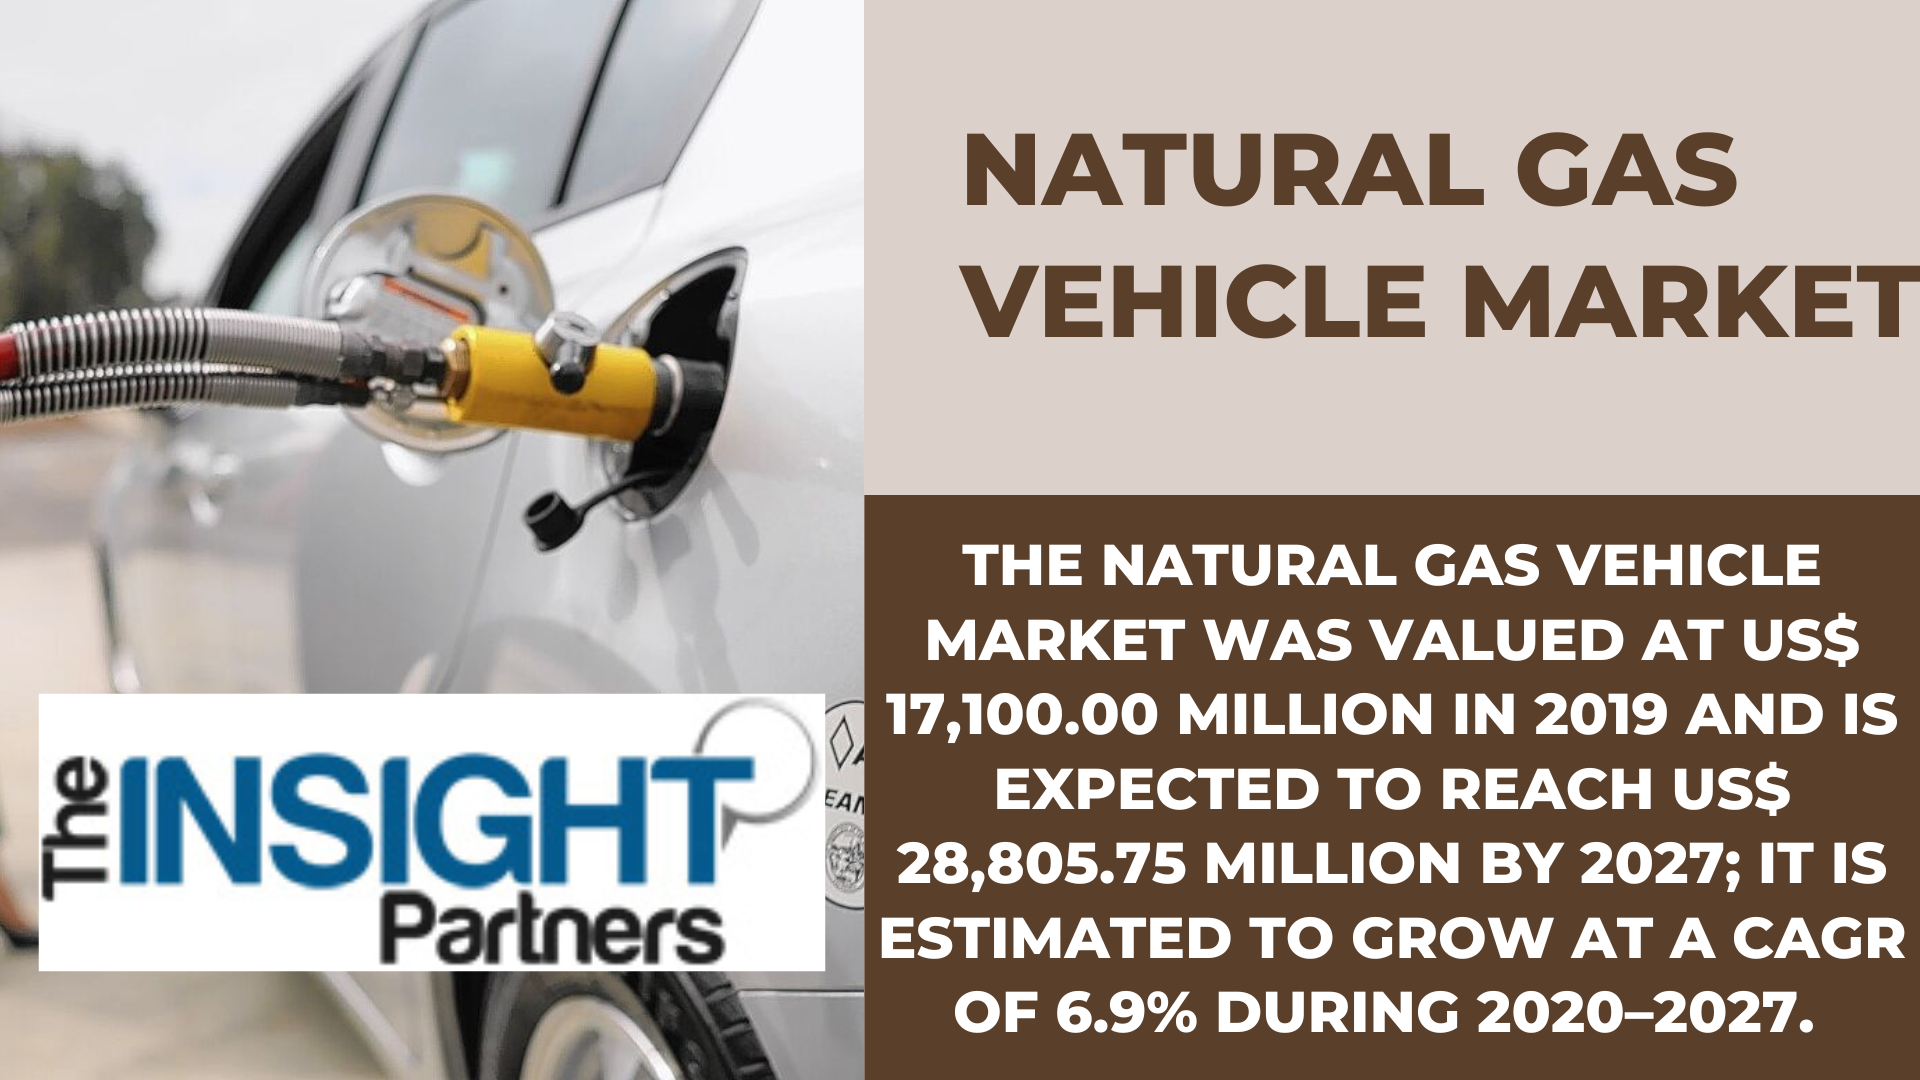 Natural Gas Vehicle Market Forecast Insights Shared in Detailed Report